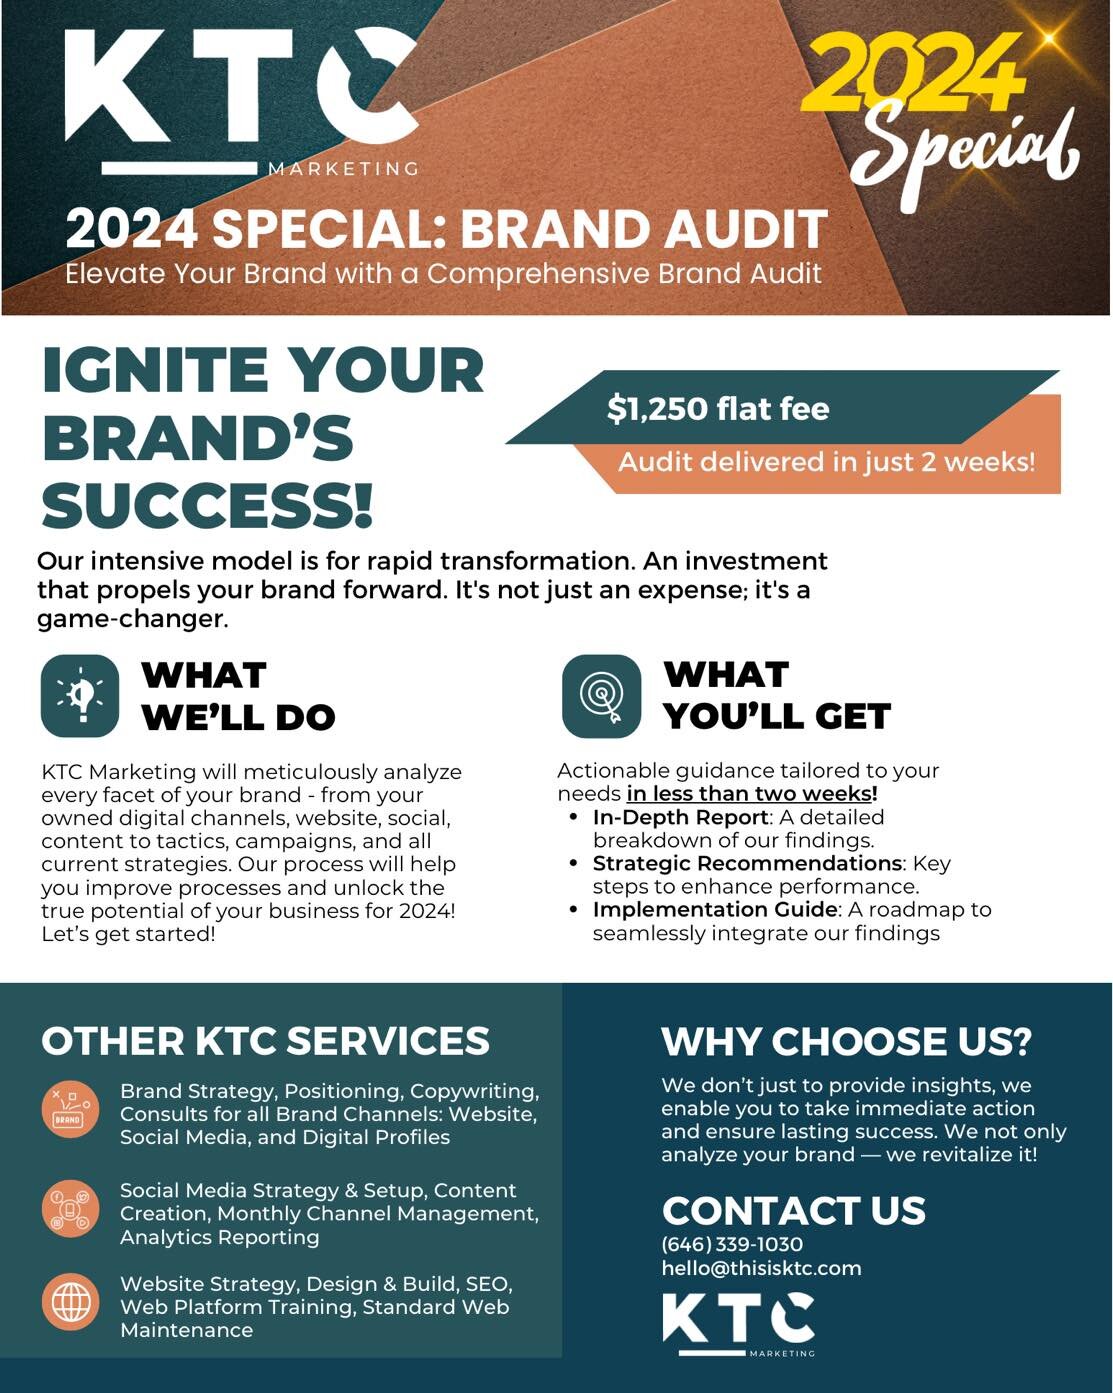 🚀 Elevate your brand with KTC Marketing's Express Brand Audit! For $1,250, receive actionable insights in two weeks! Swift transformation for lasting success! 🔍✨ let us help get all your channels, outreach, messaging and more in shape now. 

Intere